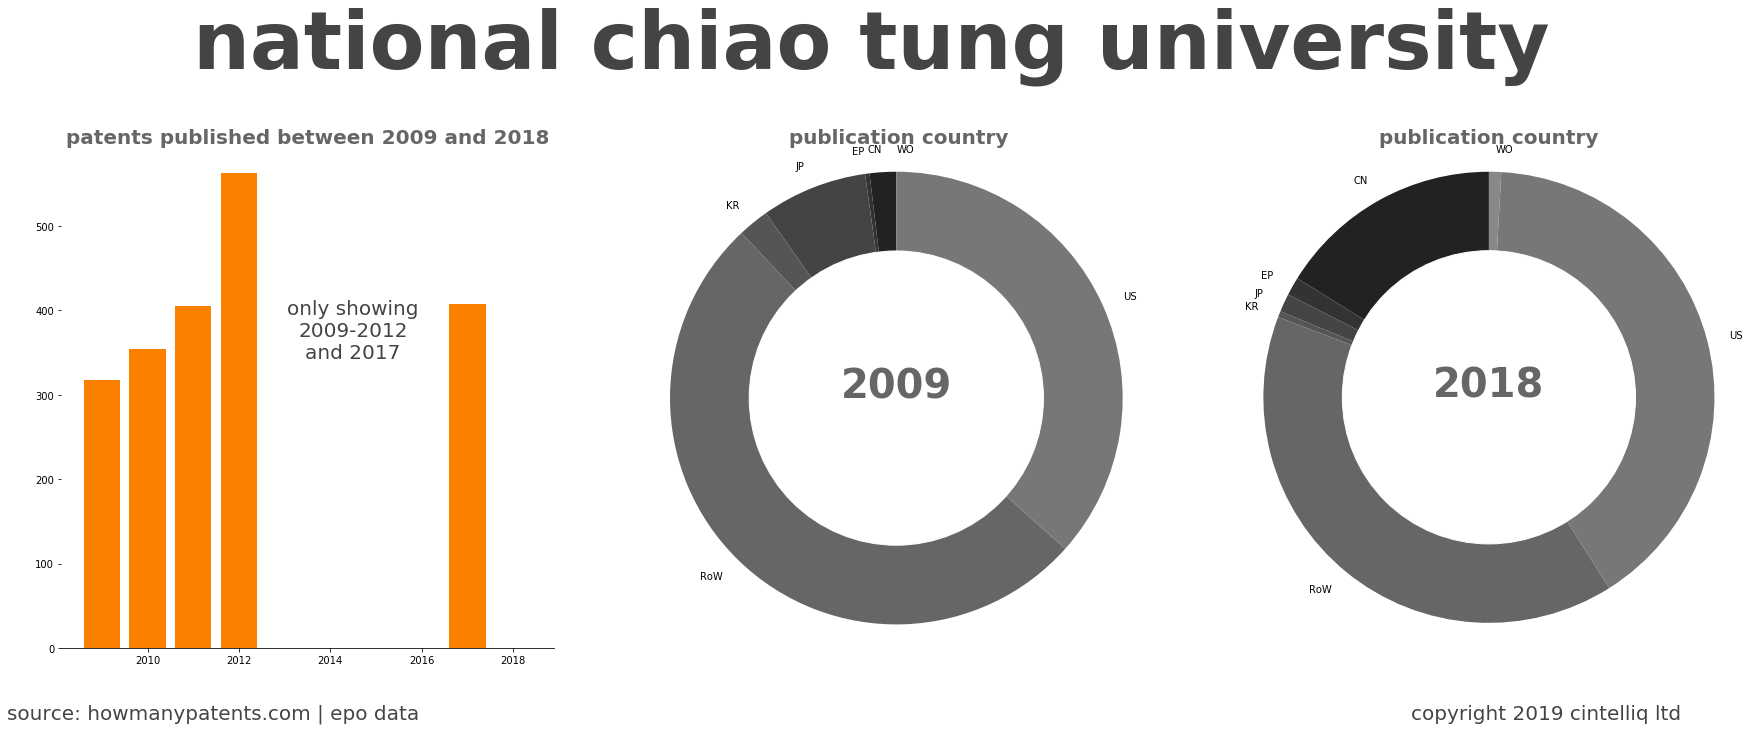 summary of patents for National Chiao Tung University